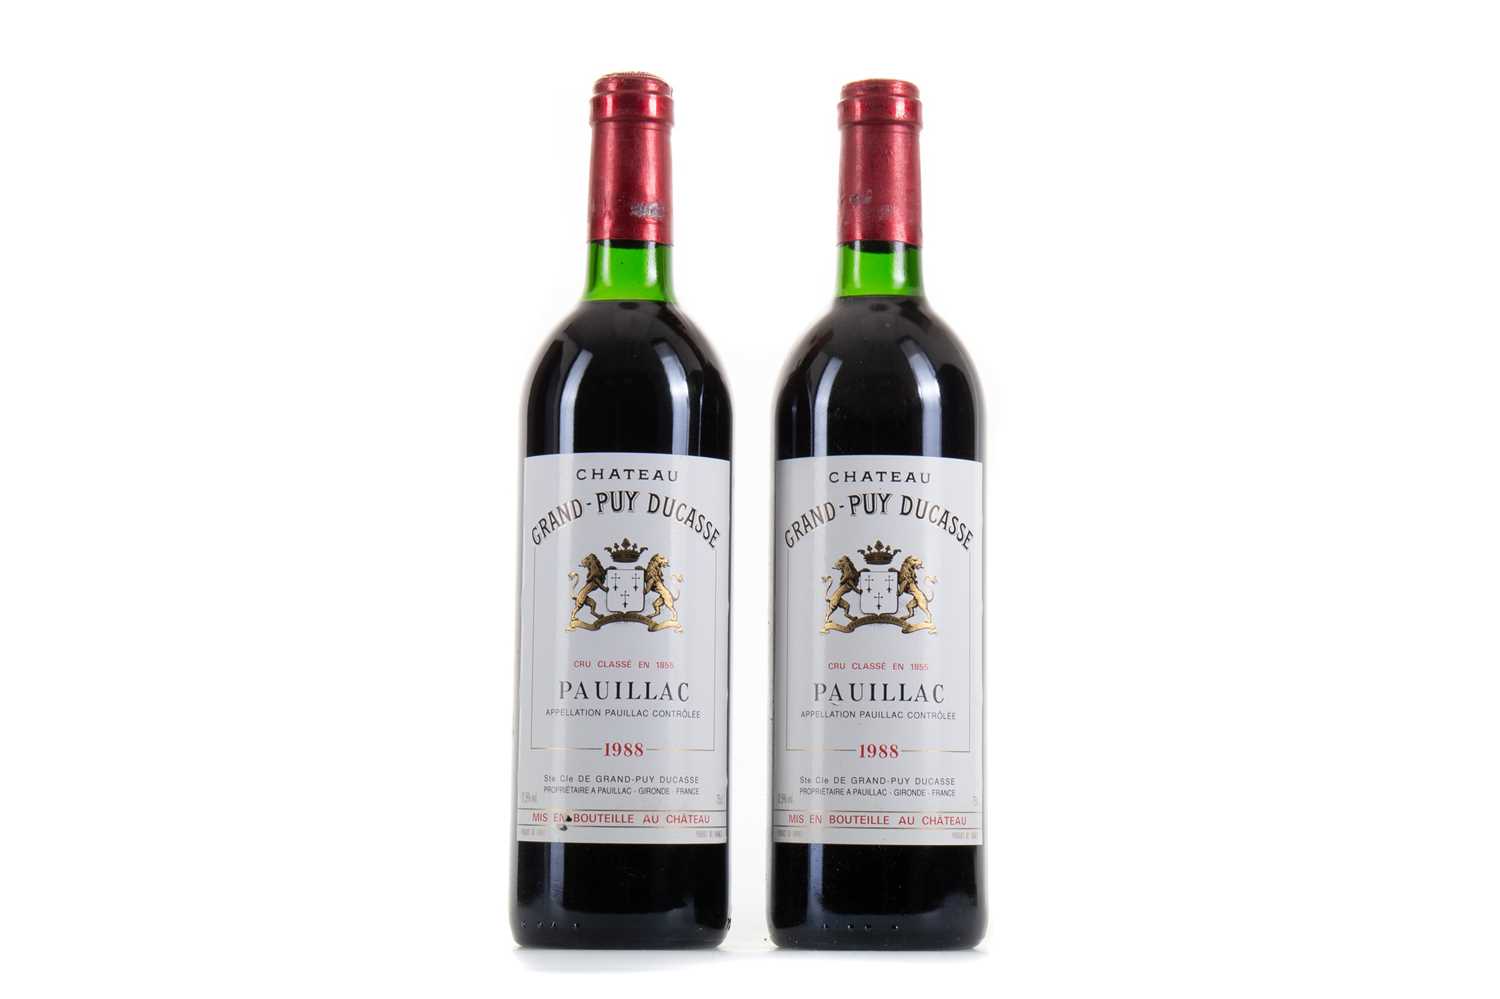 Lot 637 - 2 BOTTLES OF CHATEAU GRAND-PUY DUCASSE 1988 PAUILLAC